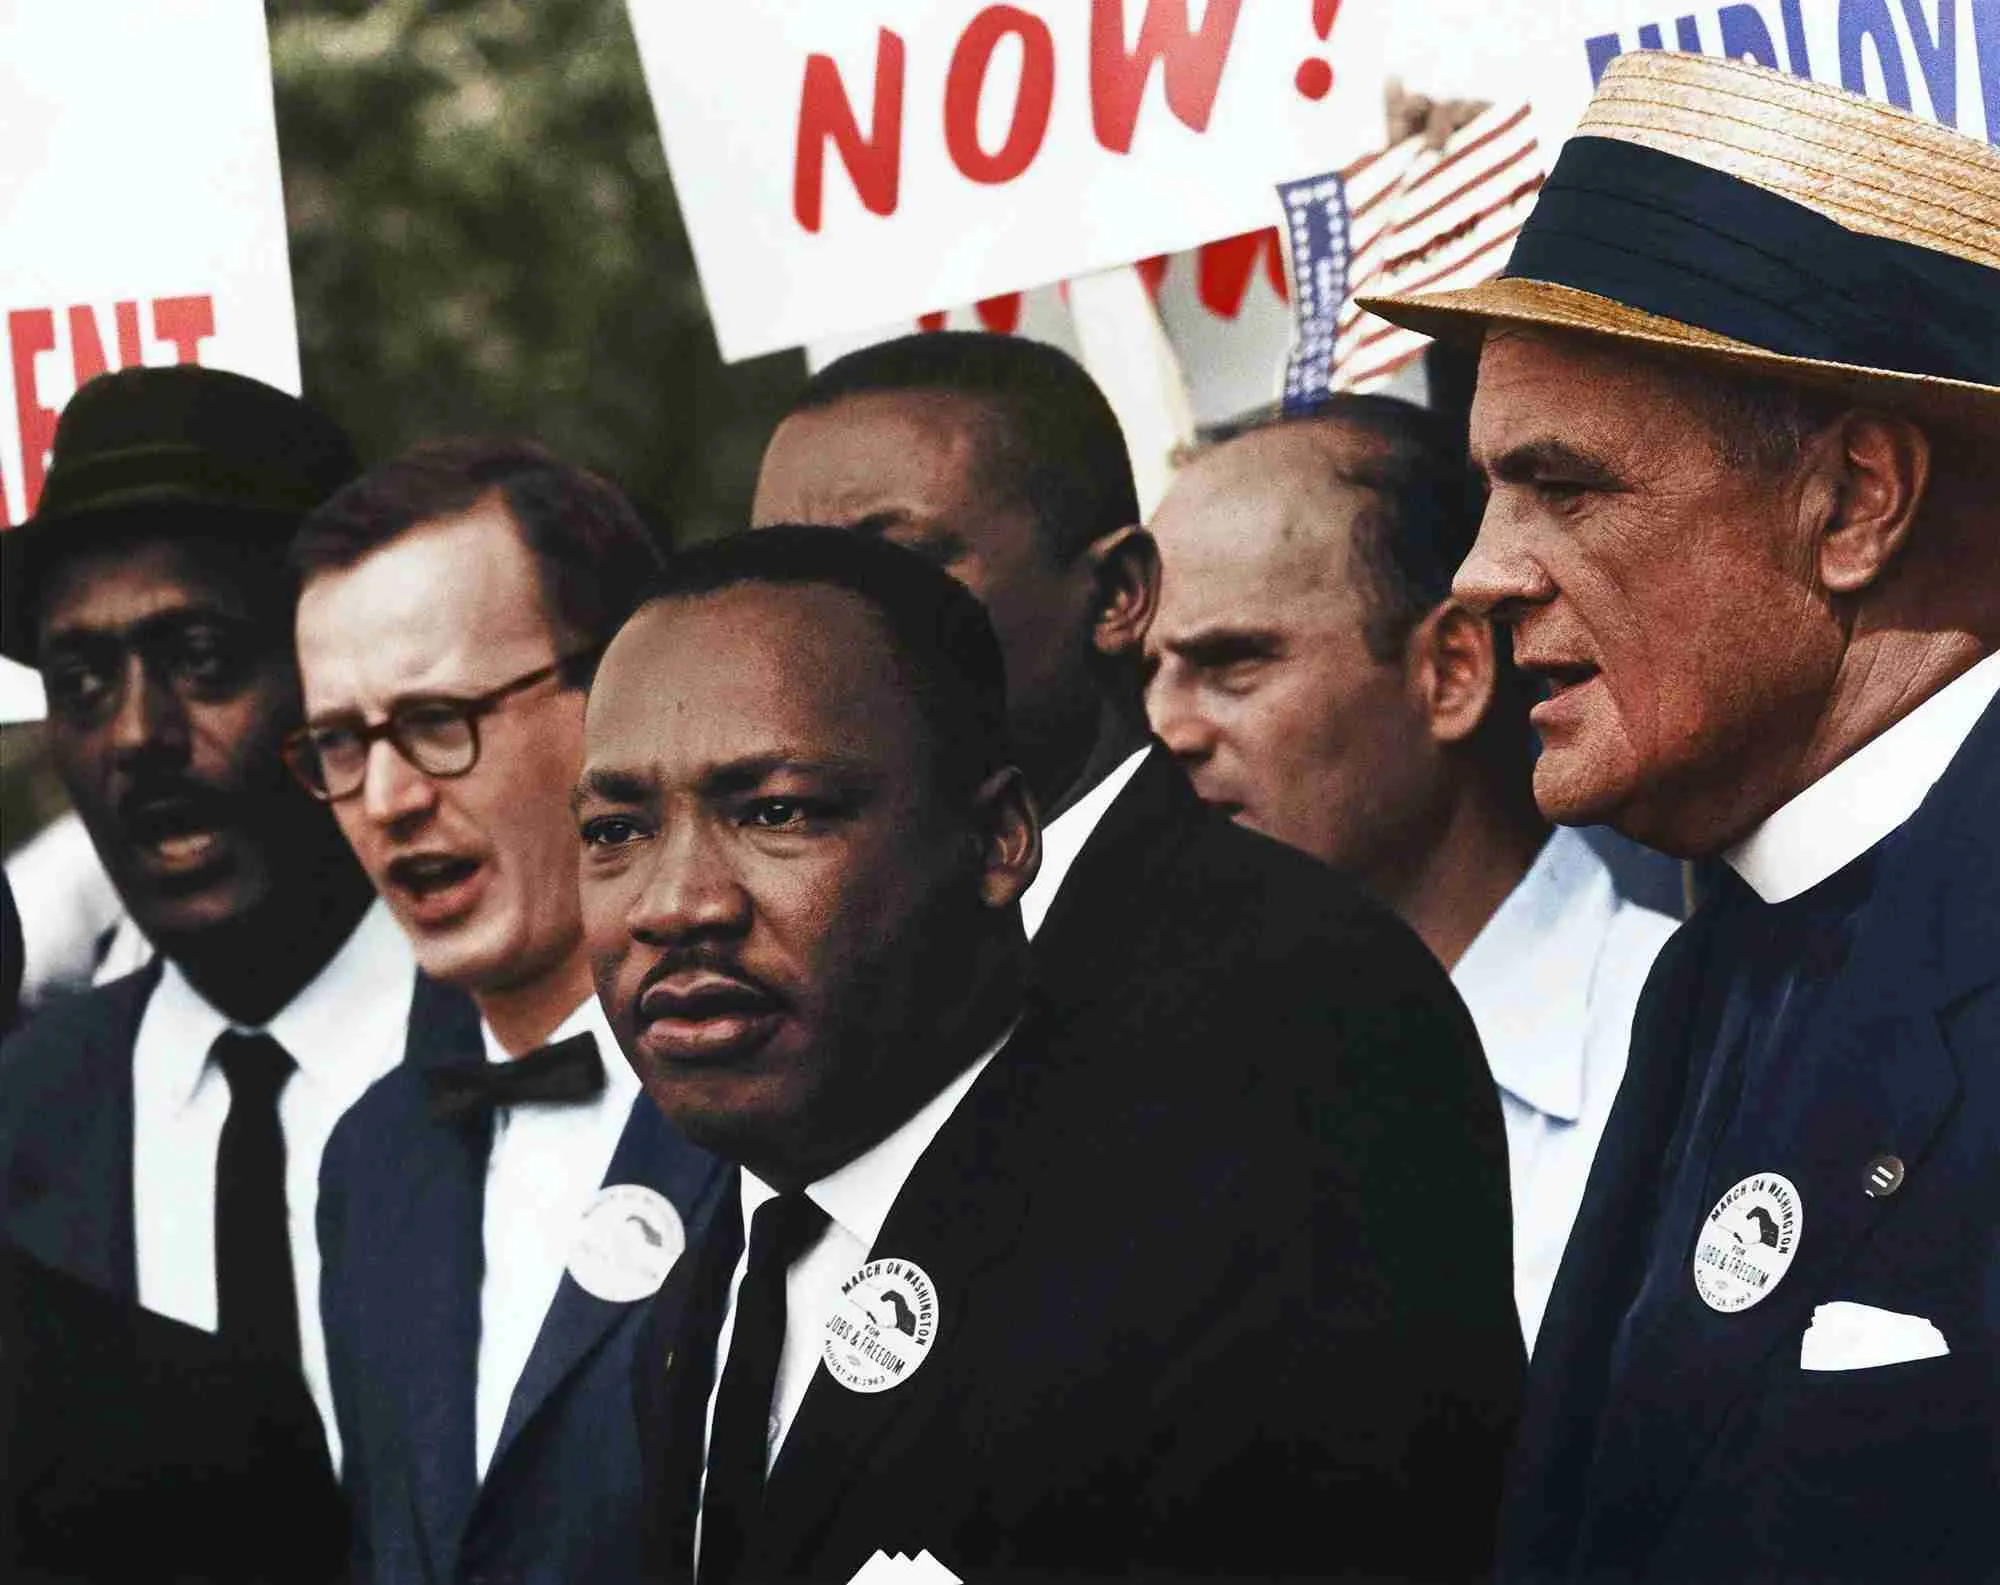 Martin Luther King Jr facts include that he was one of the most well-known and important civil rights leaders.